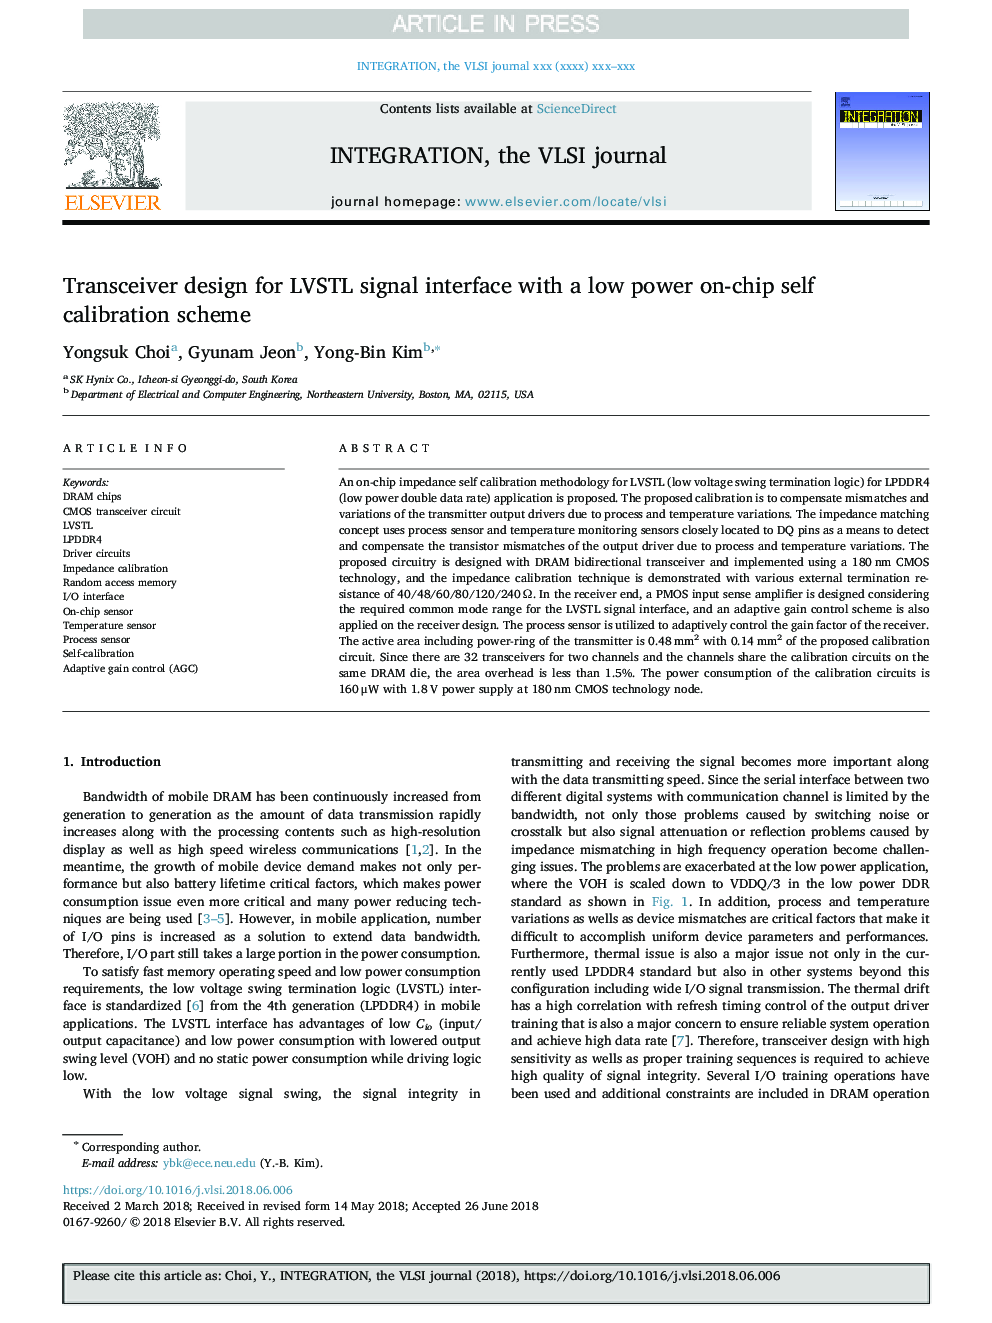 Transceiver design for LVSTL signal interface with a low power on-chip self calibration scheme